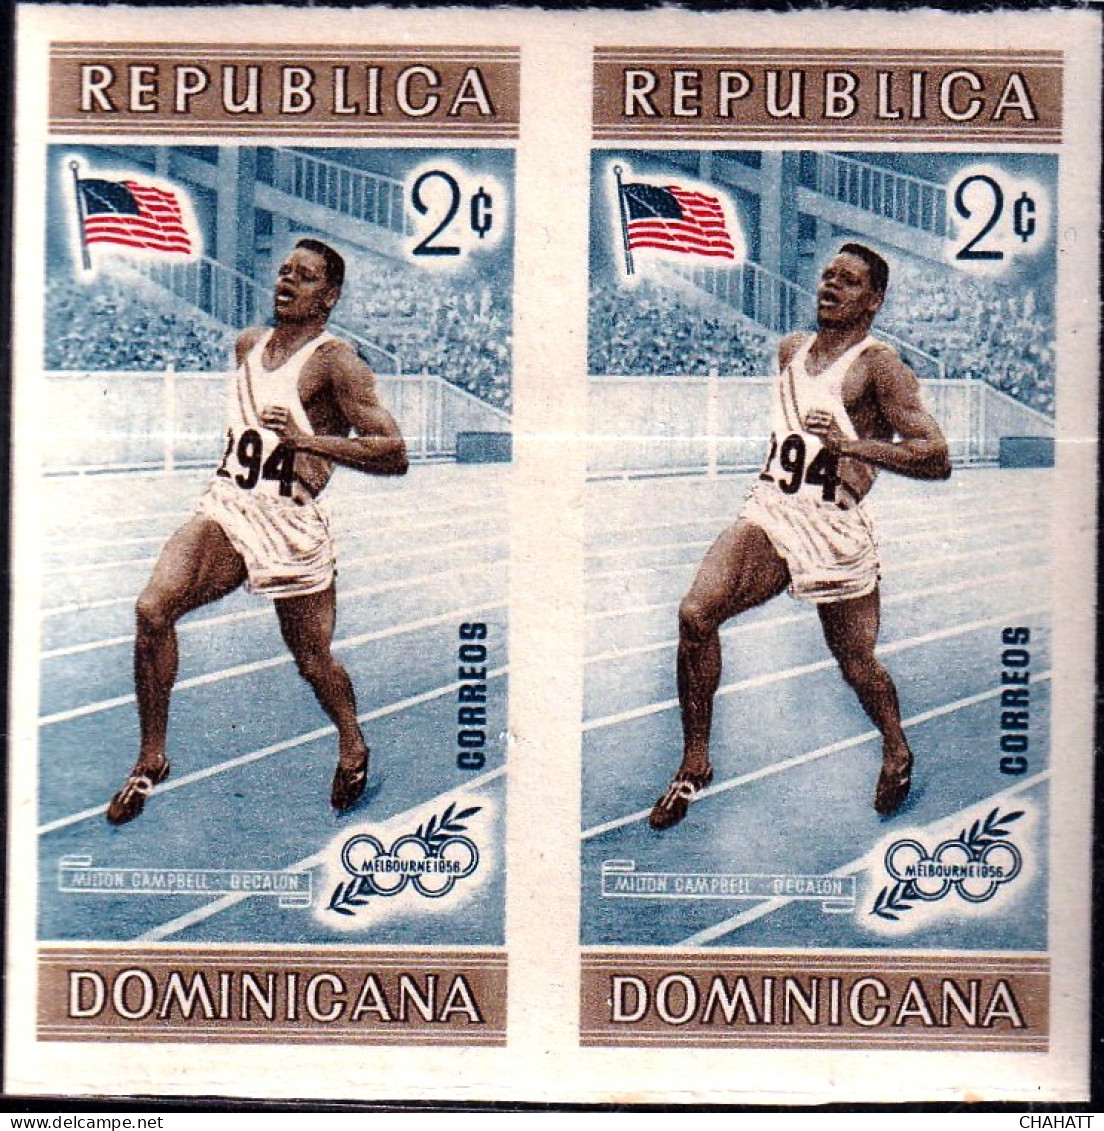 OLYMPICS-1956, MELBOURNE- DECALON (ATHLETICS) IMPERF PAIR-COLOR VARIETY- DOMINICANA-MNH- SCARCE- A5-745 - Ete 1956: Melbourne